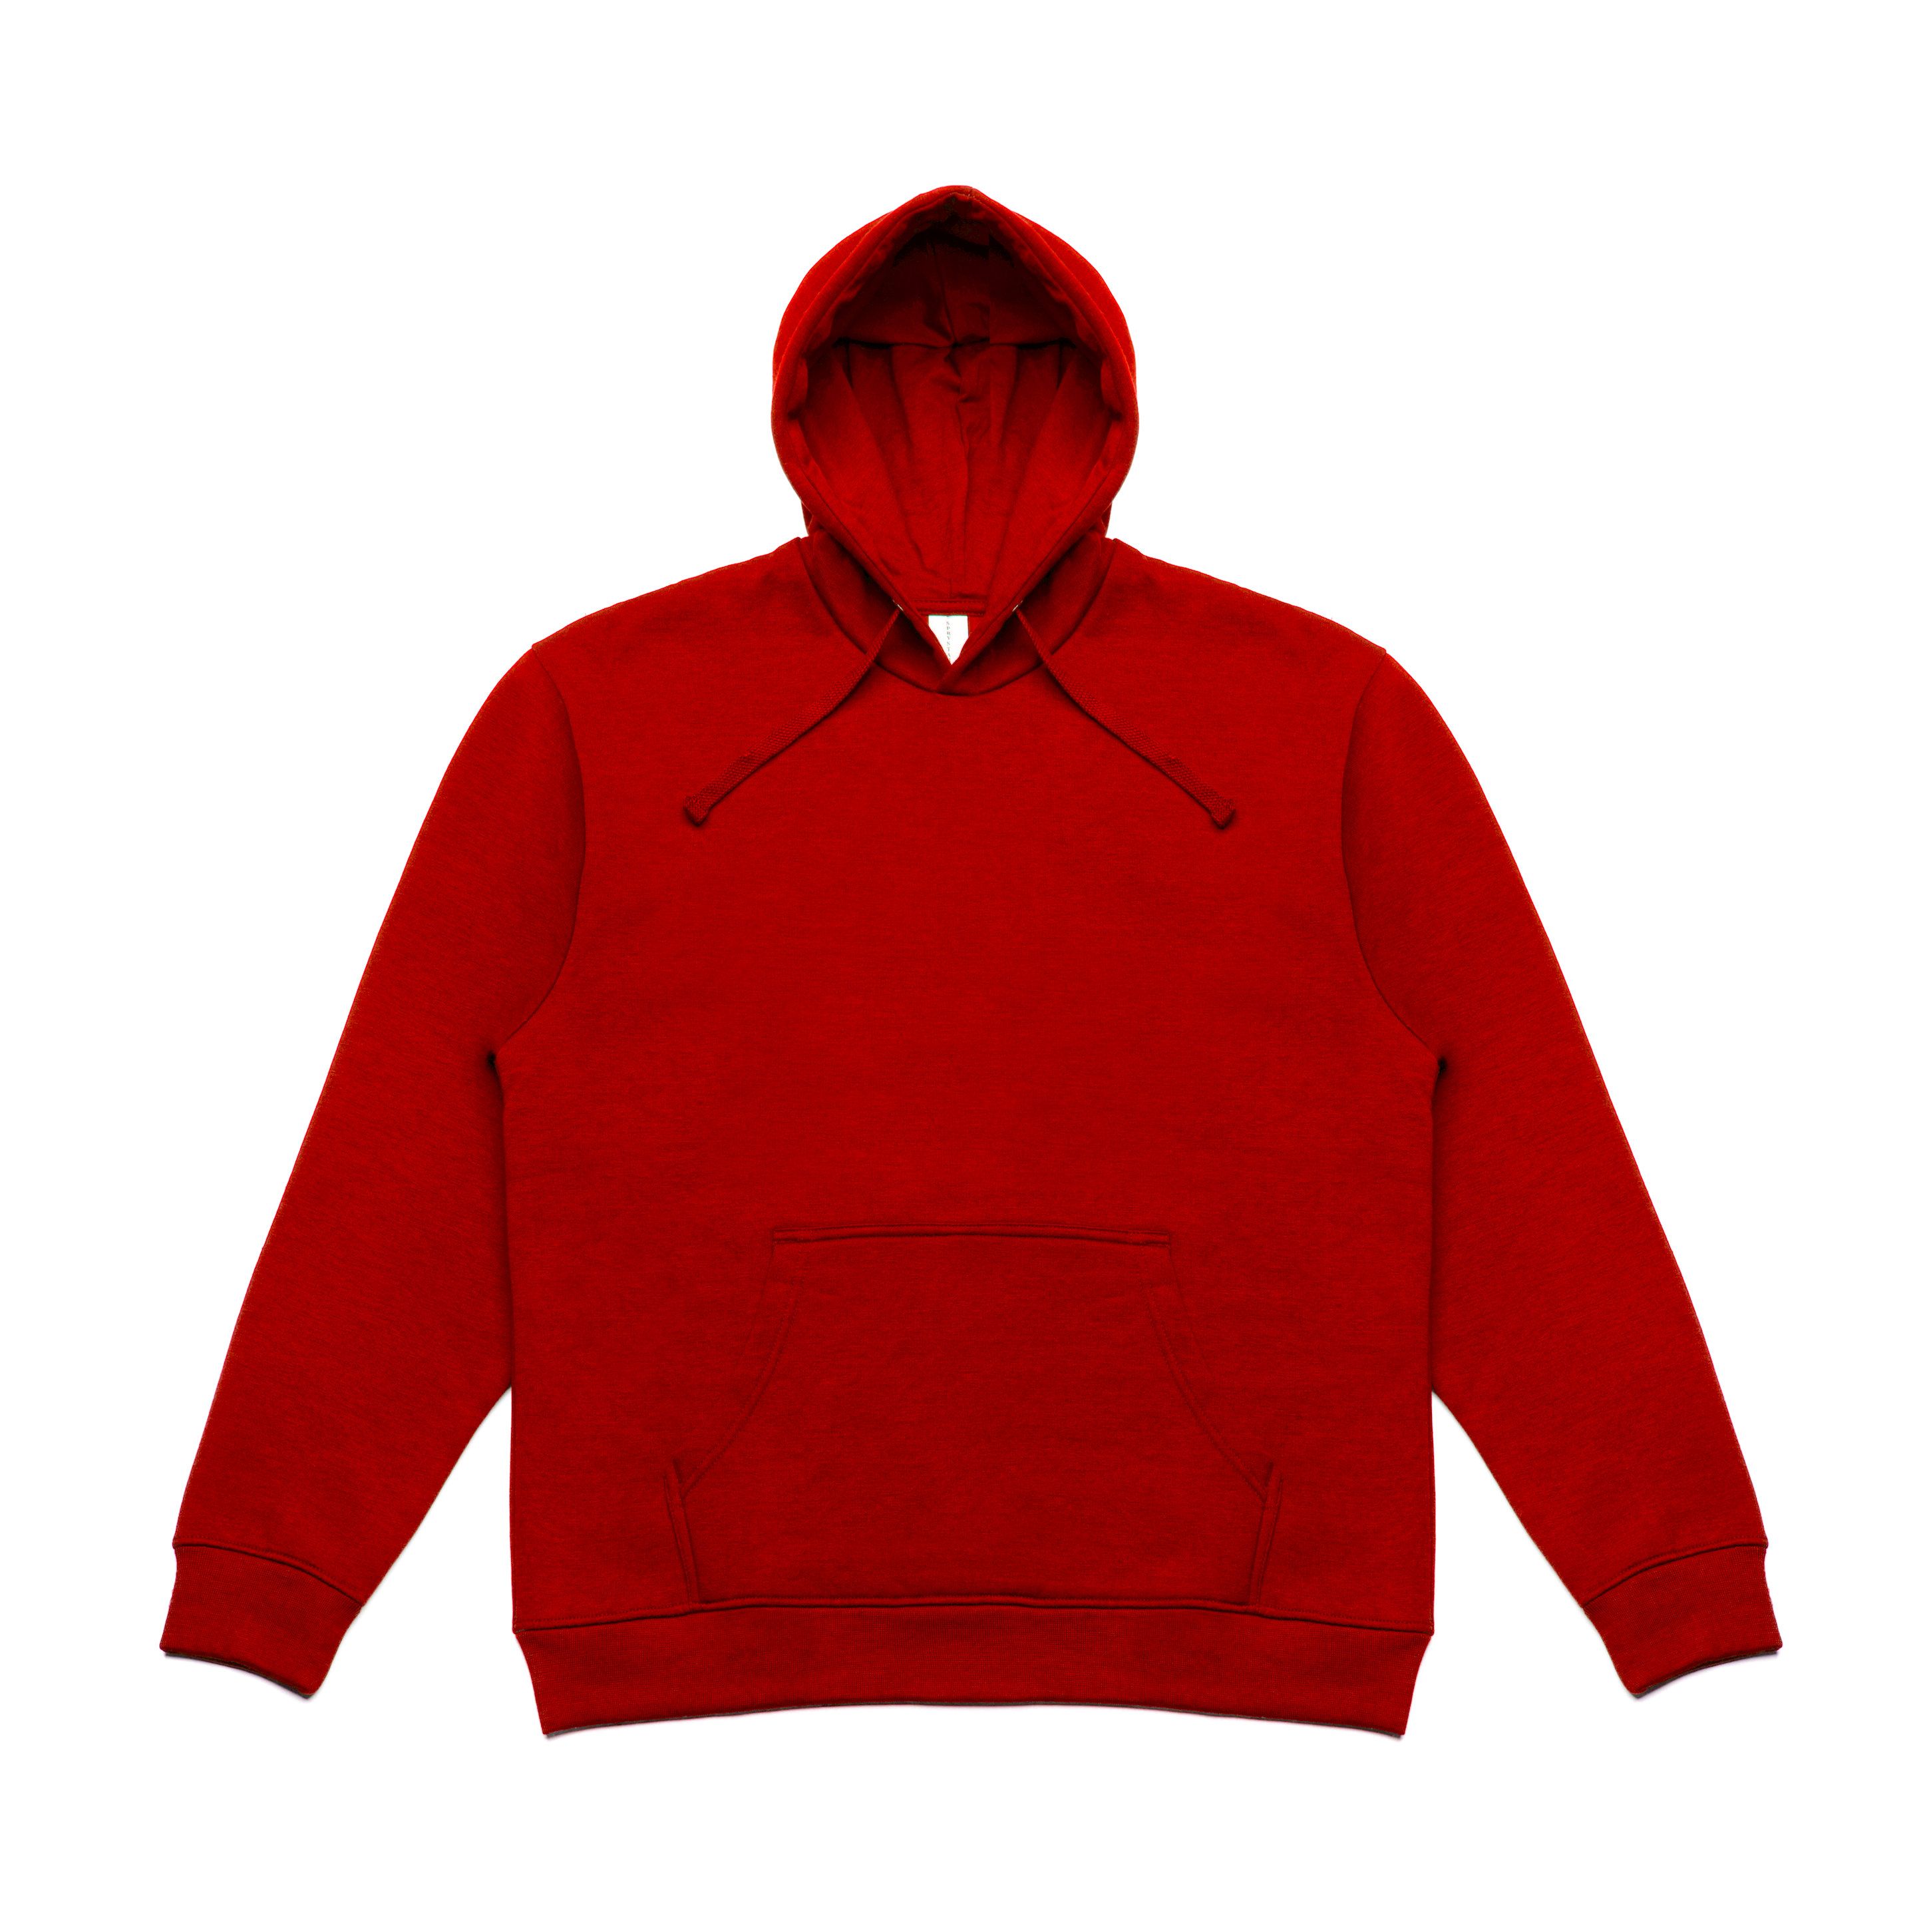 SS1024 Premium Pullover Hoodie - Red [Wholesale]